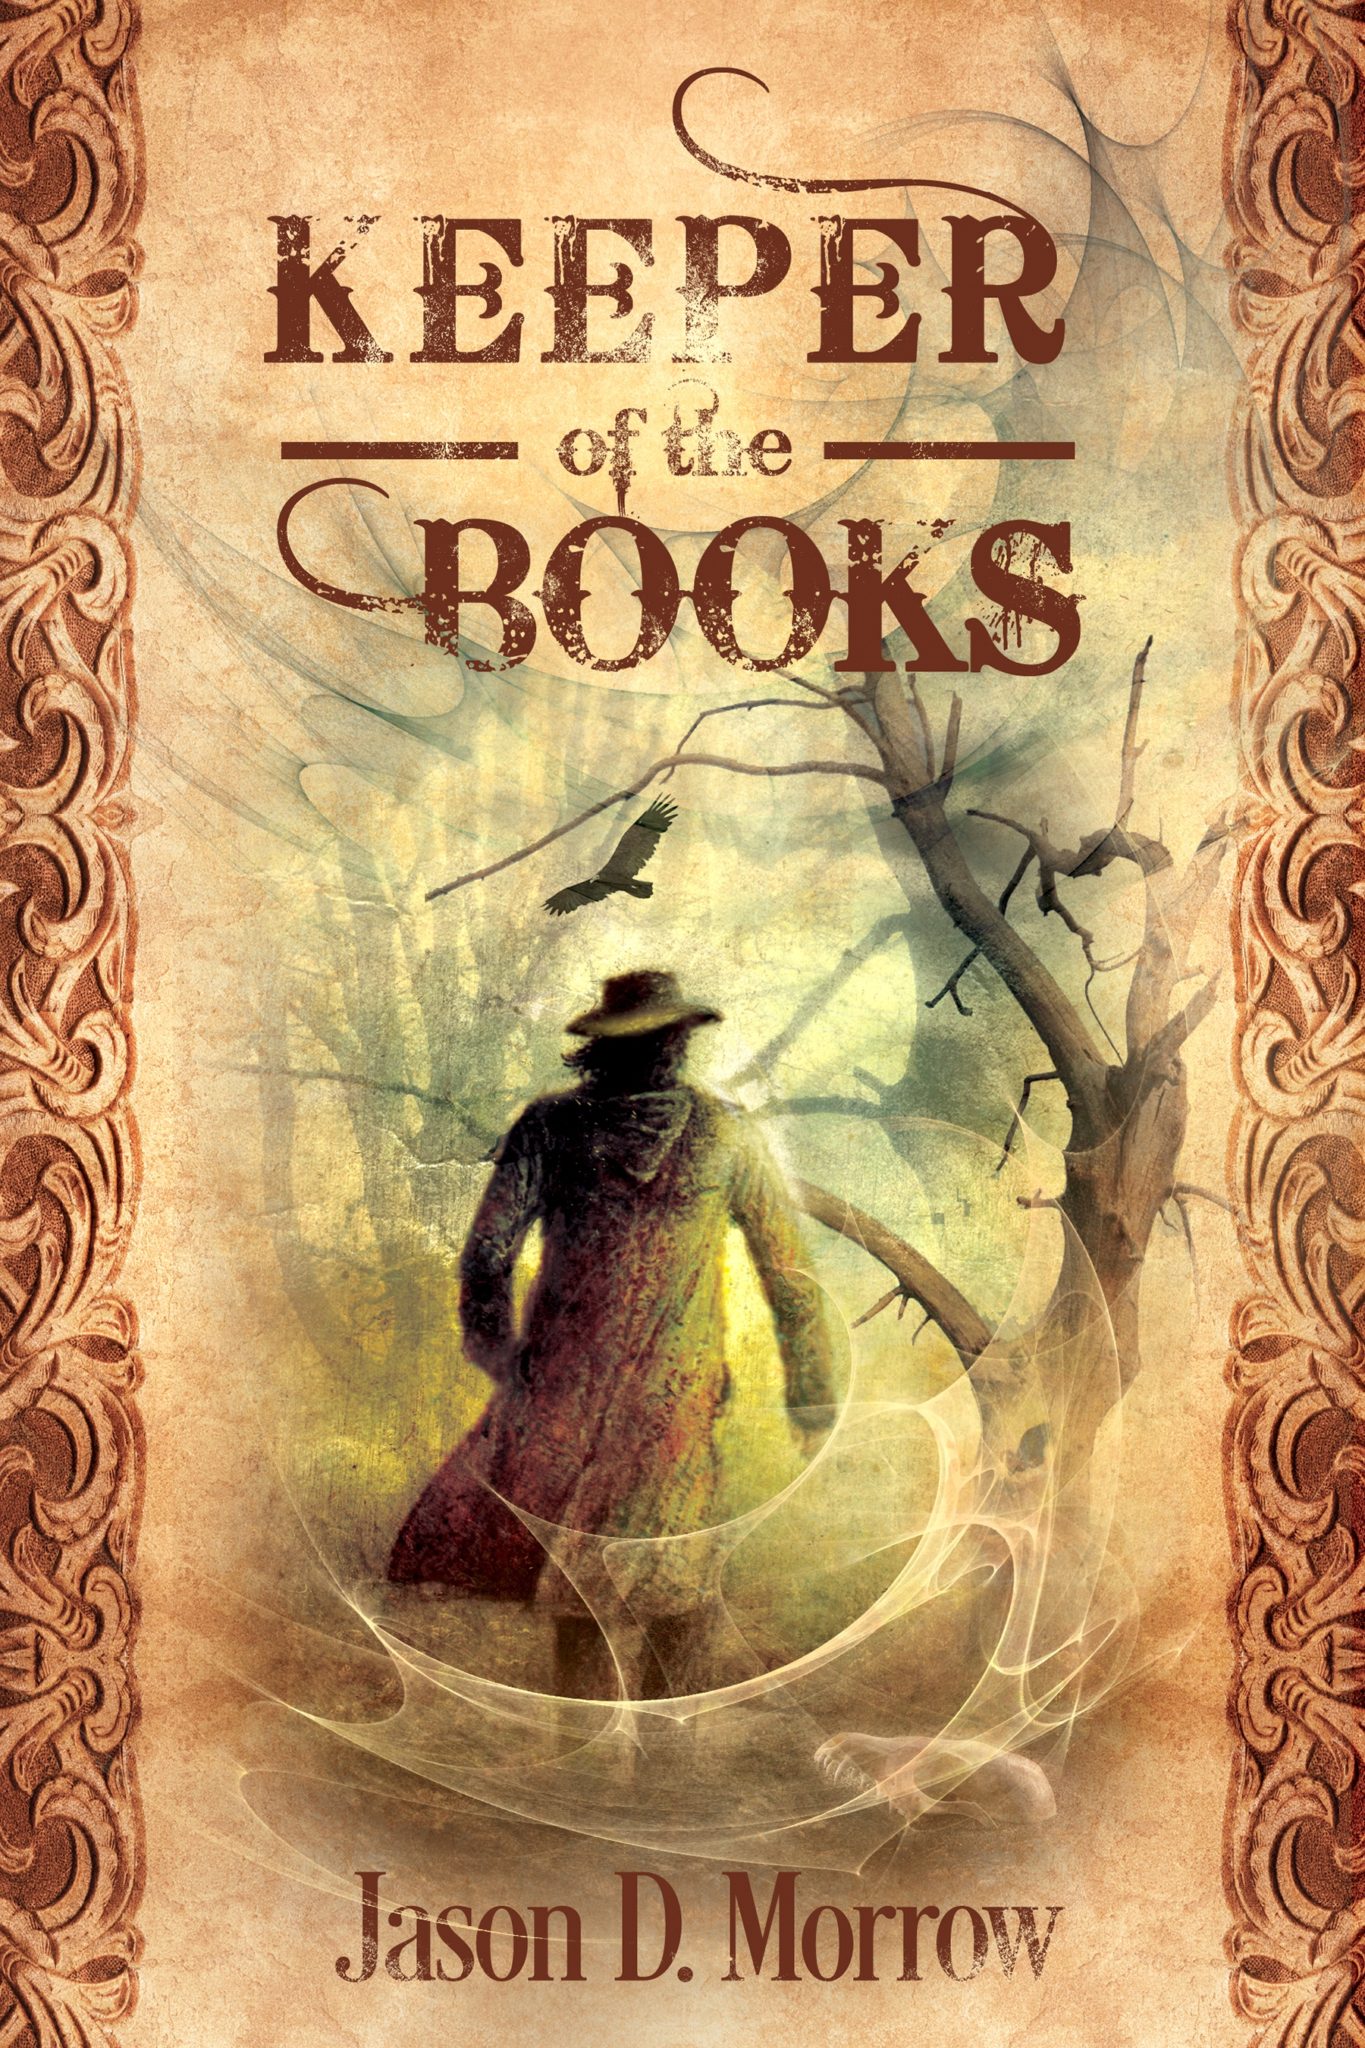 FREE: Keeper of the Books by Jason D. Morrow